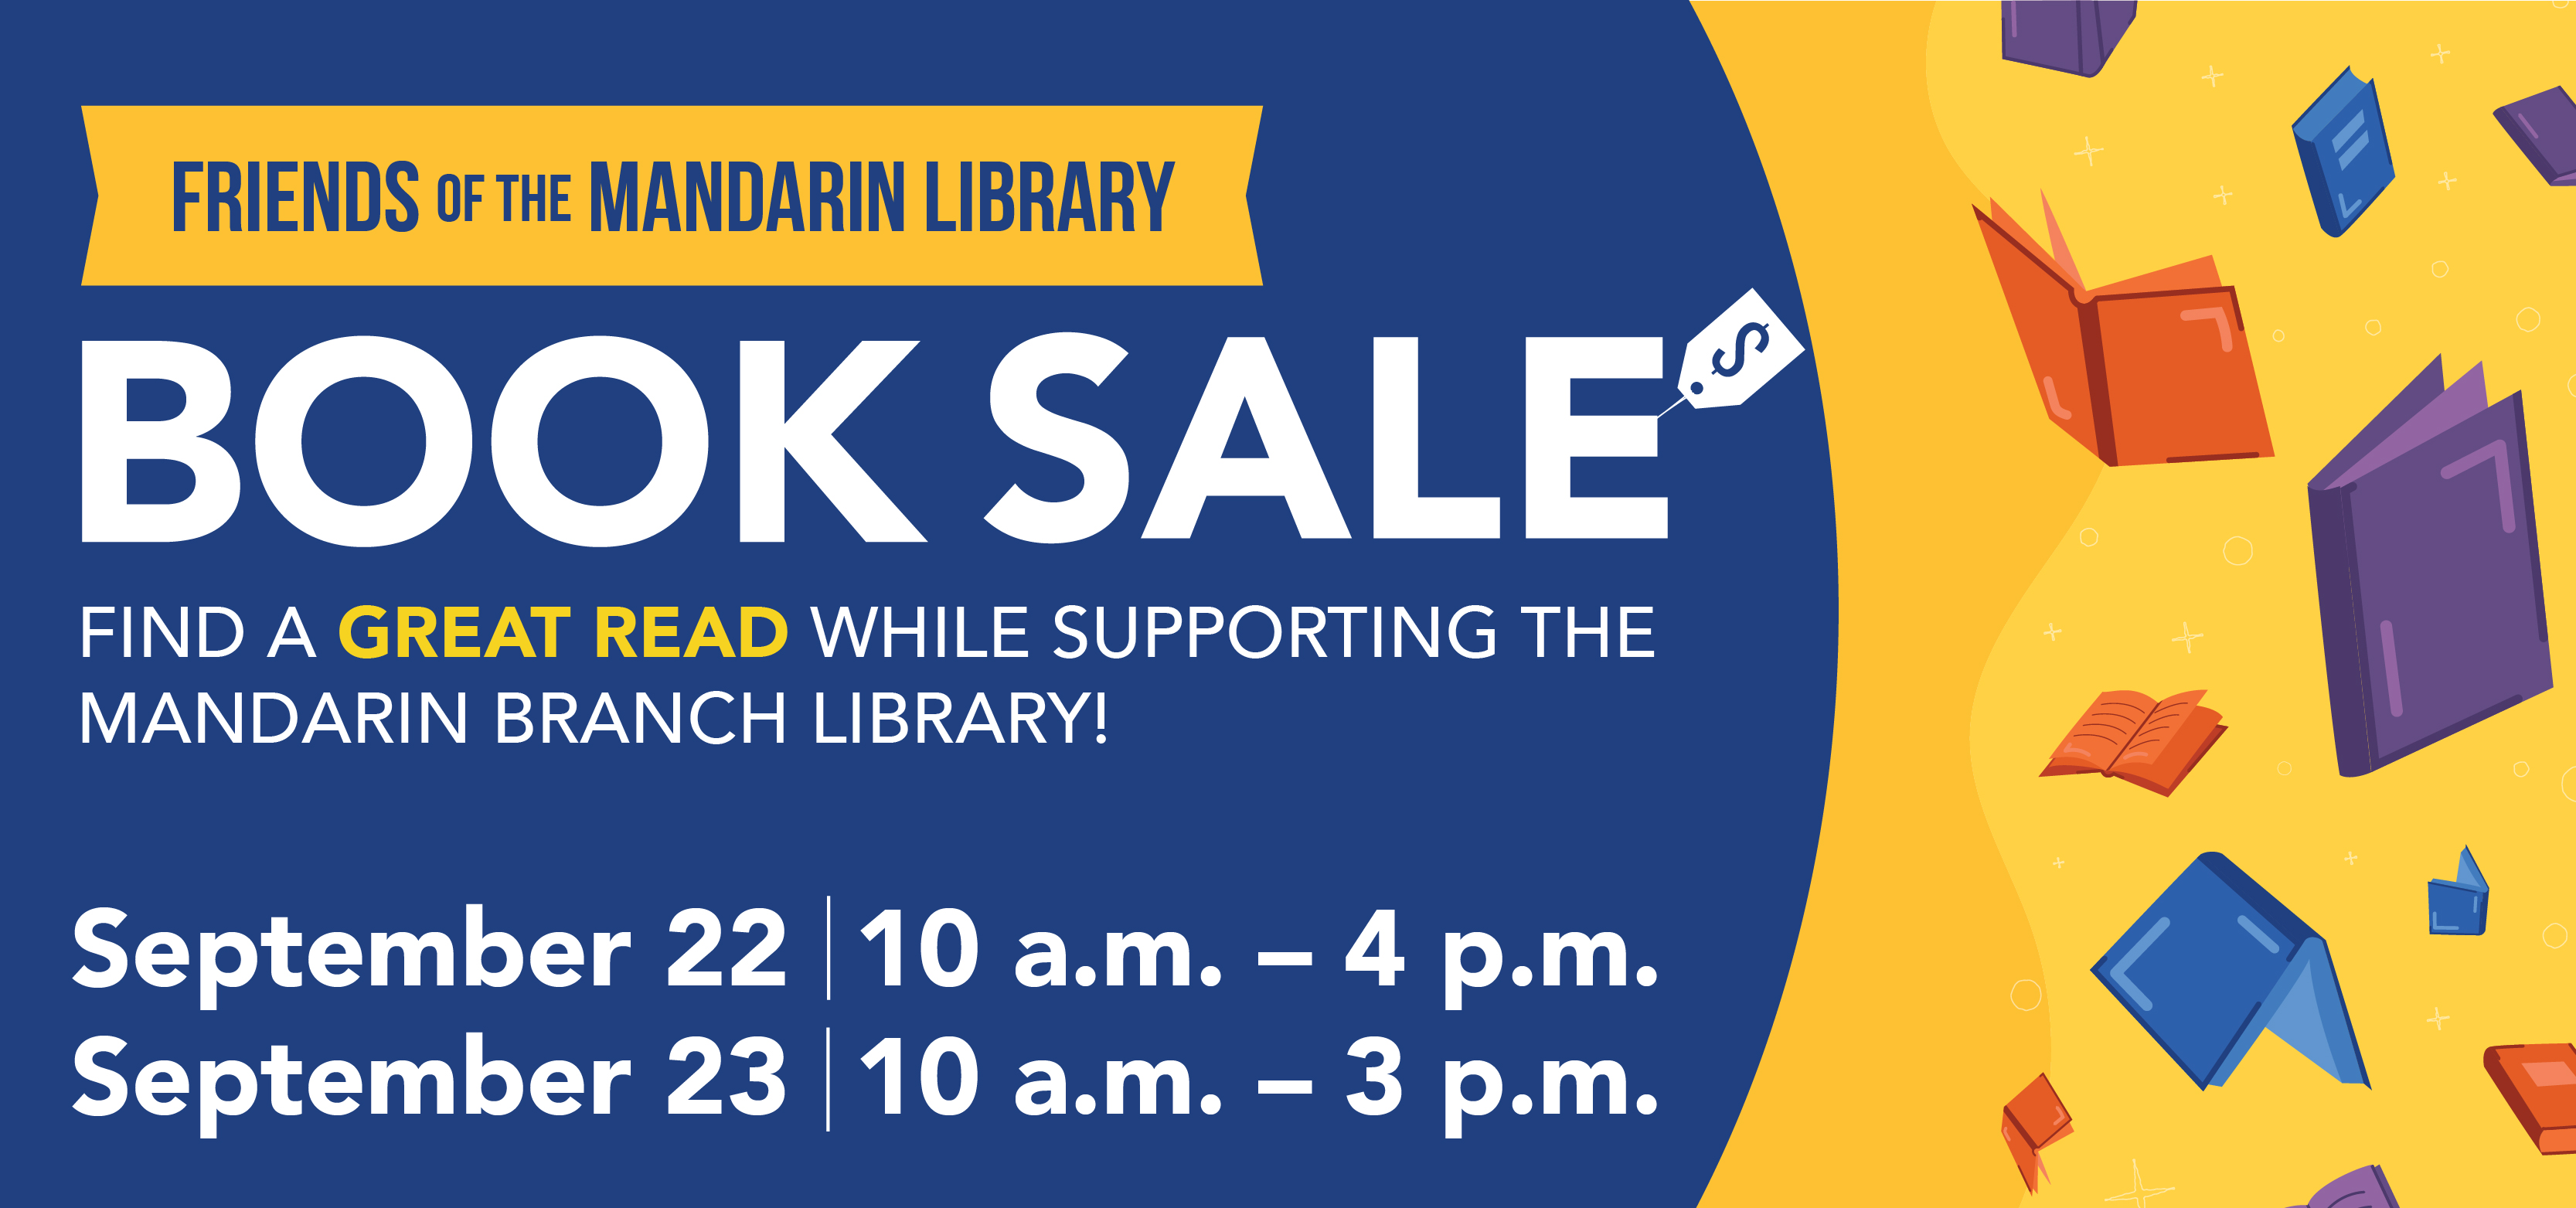 Friends of the Mandarin Library book sale